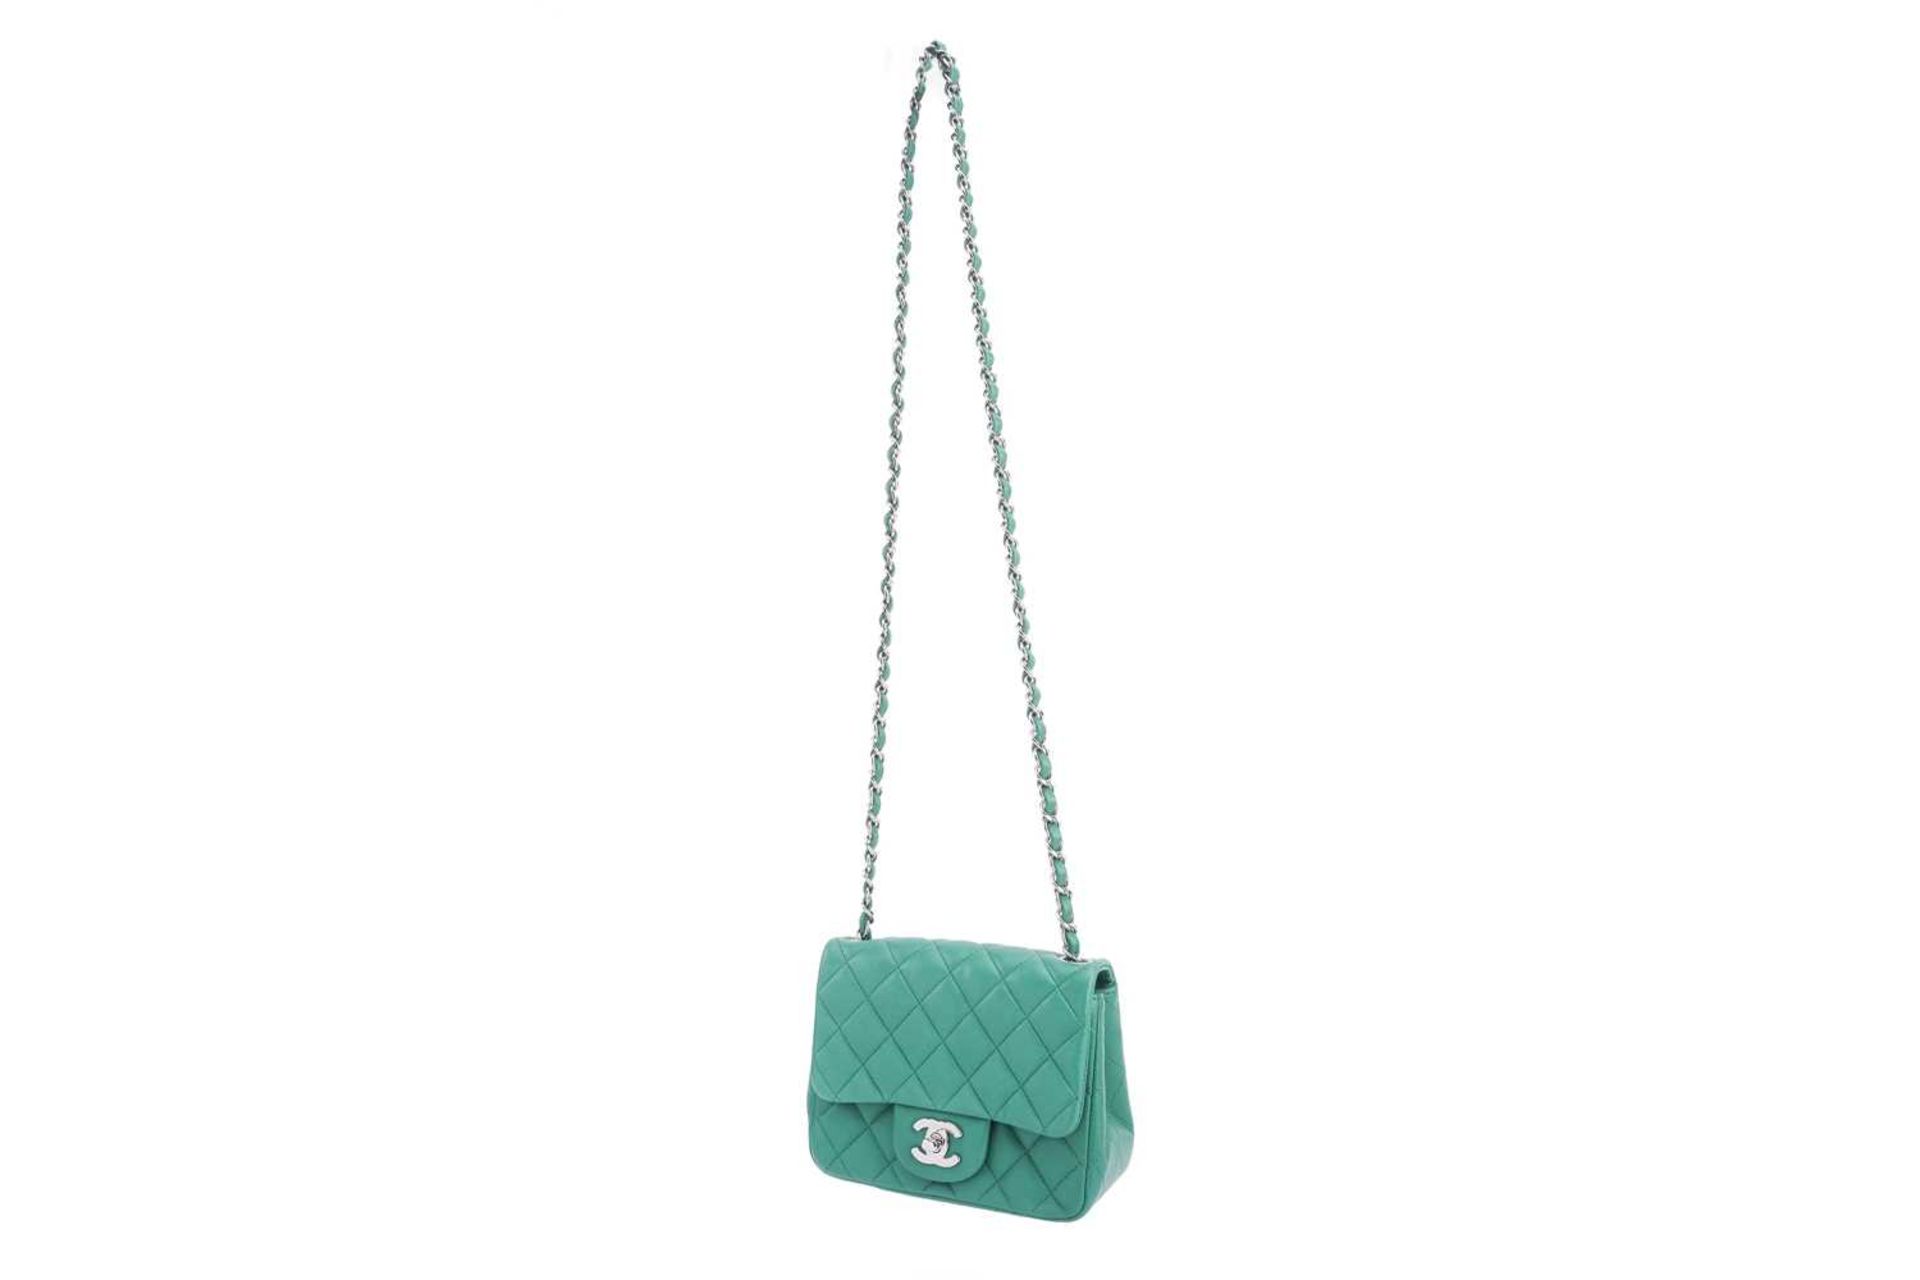 Chanel - a mini flap bag in green diamond-quilted lambskin leather, circa 2016, square body with - Image 3 of 12